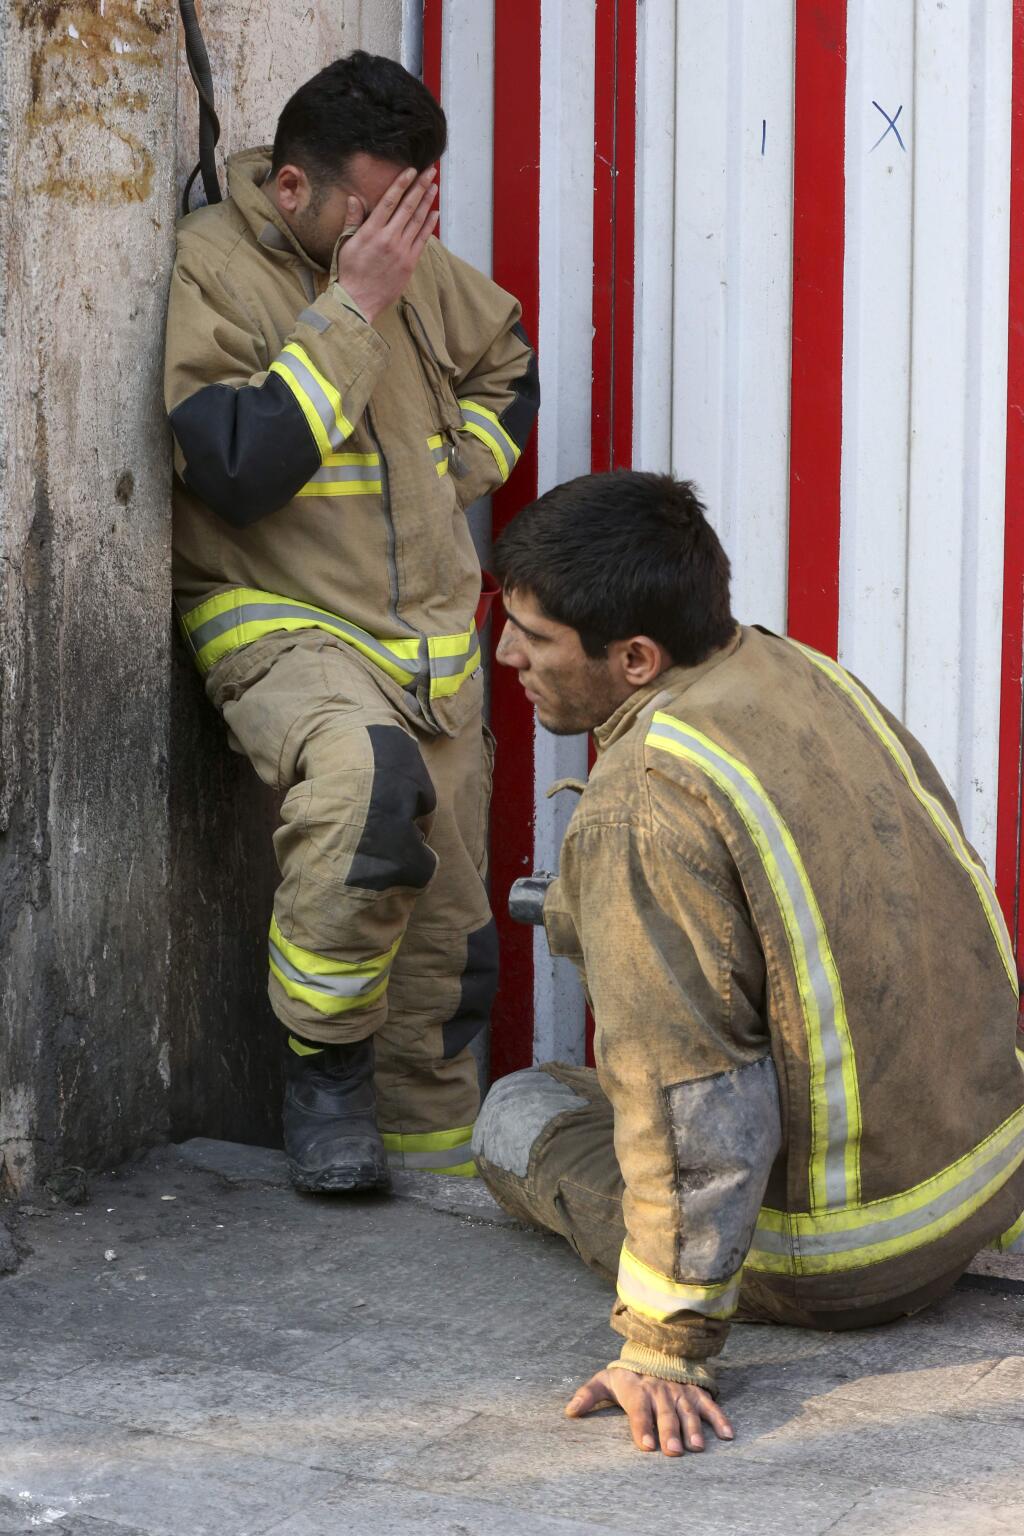 An emotional firefighter stands next to his colleague outside to the Plasco building engulfed by a fire, in central Tehran, Iran, Thursday, Jan. 19, 2017. The disaster struck the iconic structure in central Tehran just north of the Iranian capital's sprawling bazaar. Firefighters, soldiers and other emergency responders dug through the rubble, looking for survivors. Dozens of firefighters were killed. (AP Photo/Vahid Salemi)